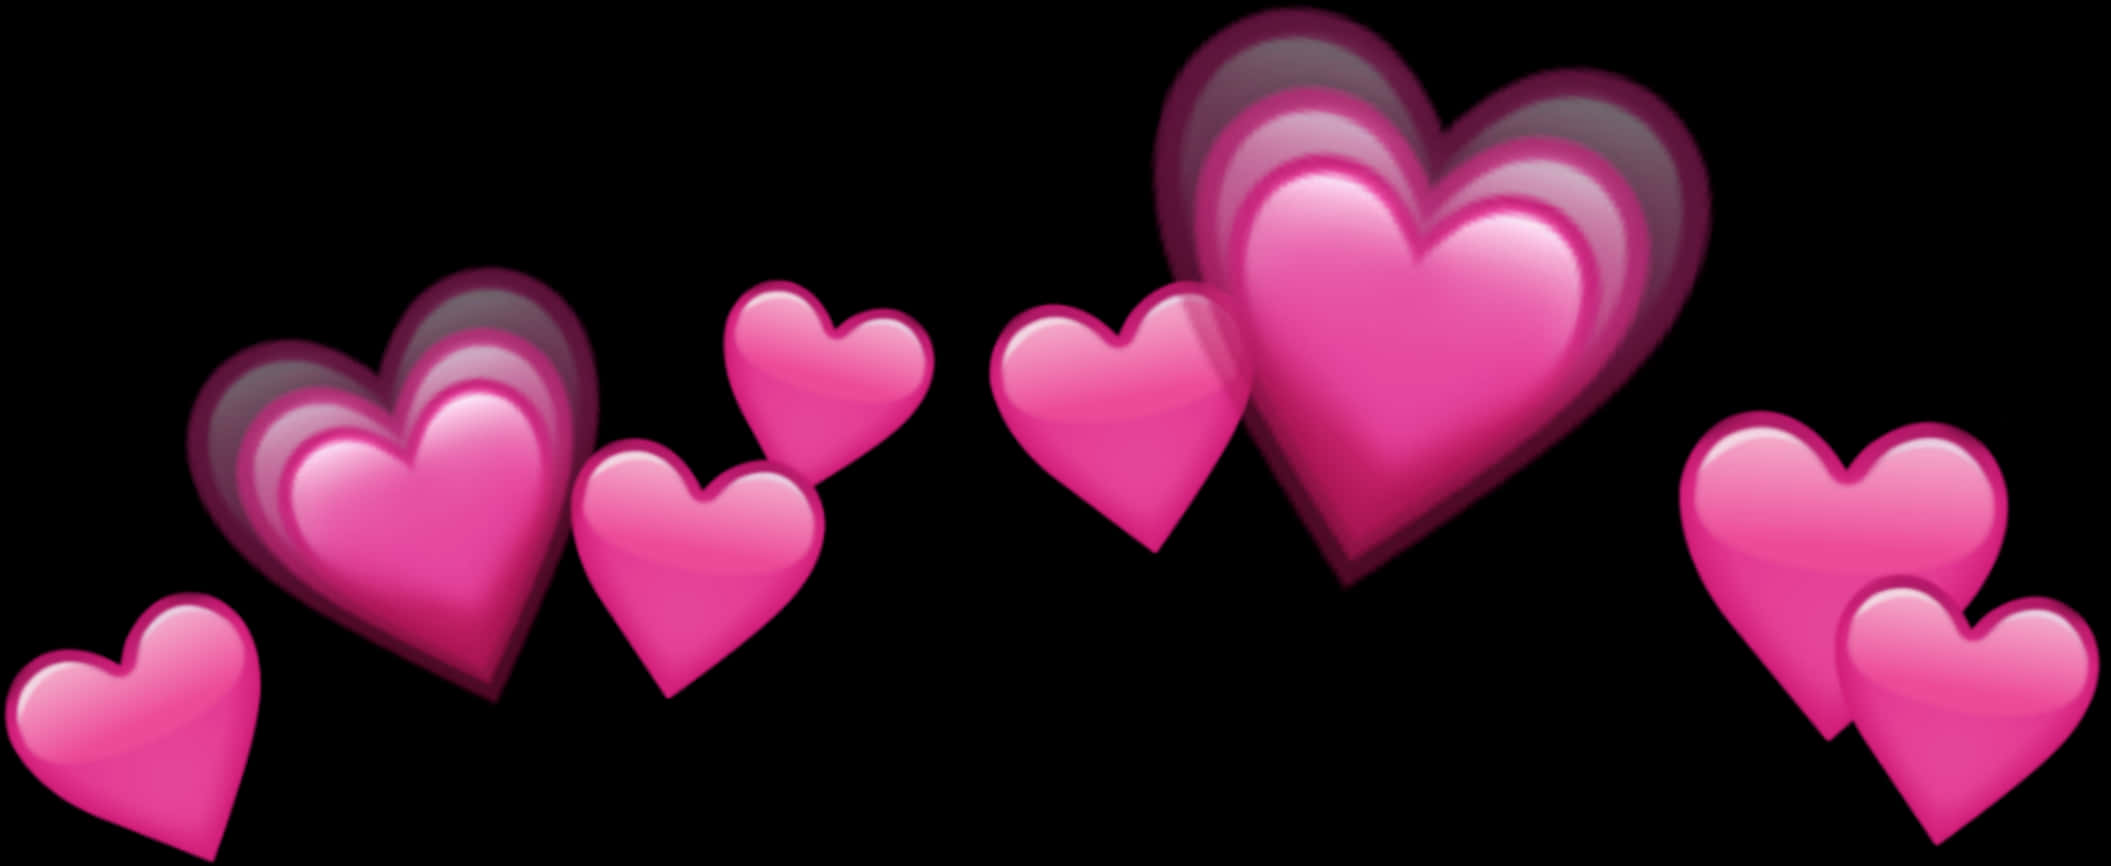 Floating Pink Hearts Graphic